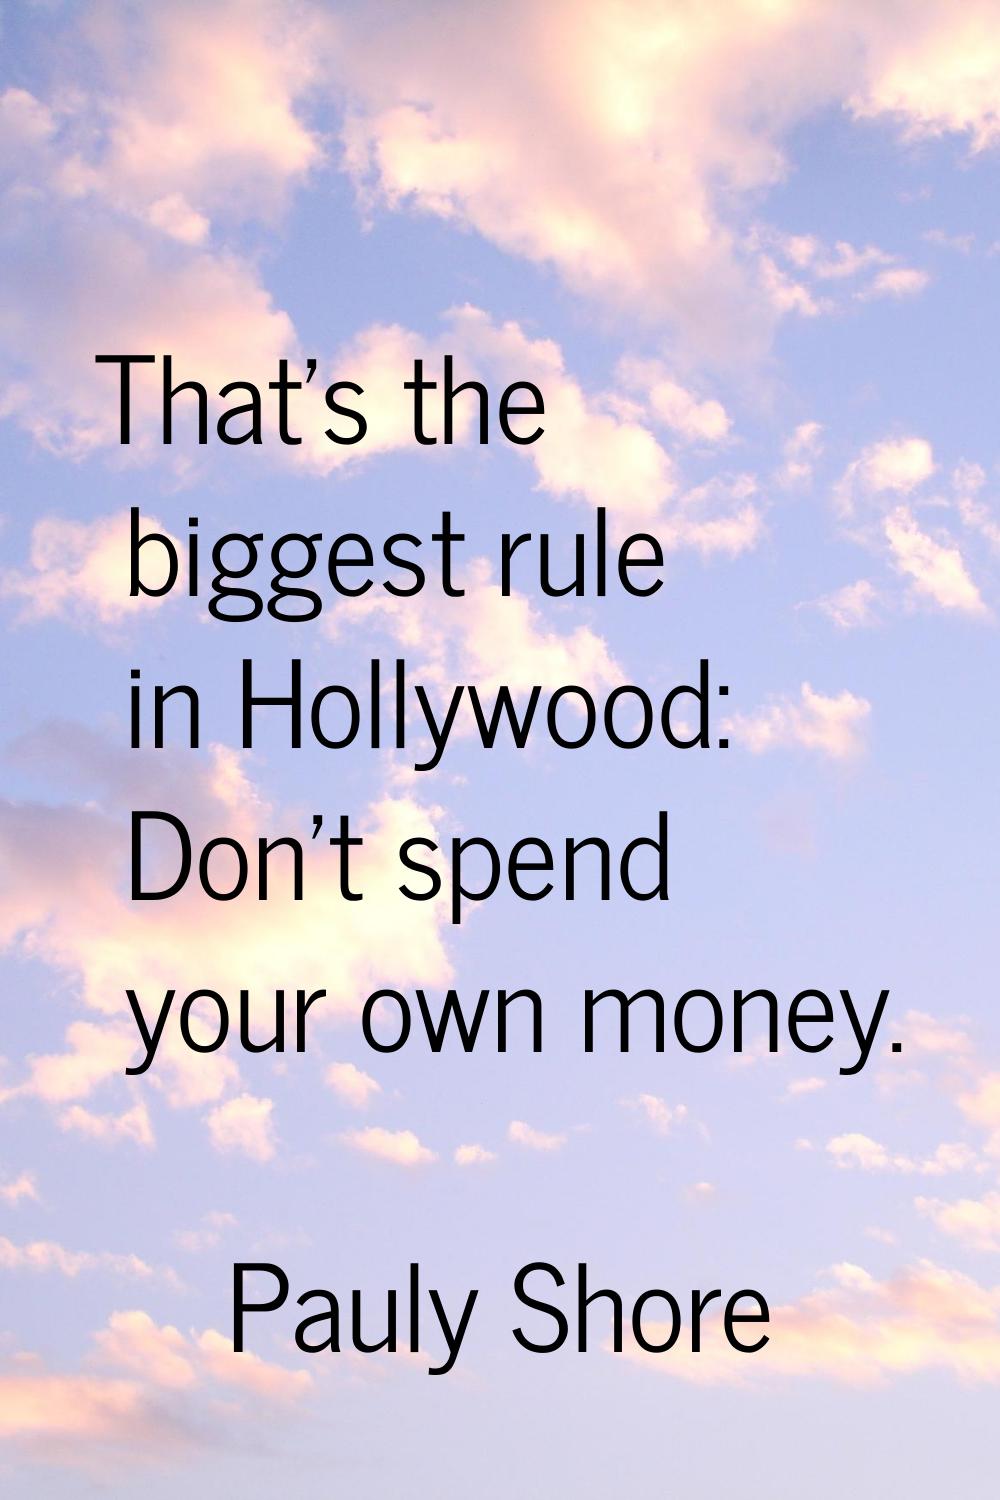 That's the biggest rule in Hollywood: Don't spend your own money.